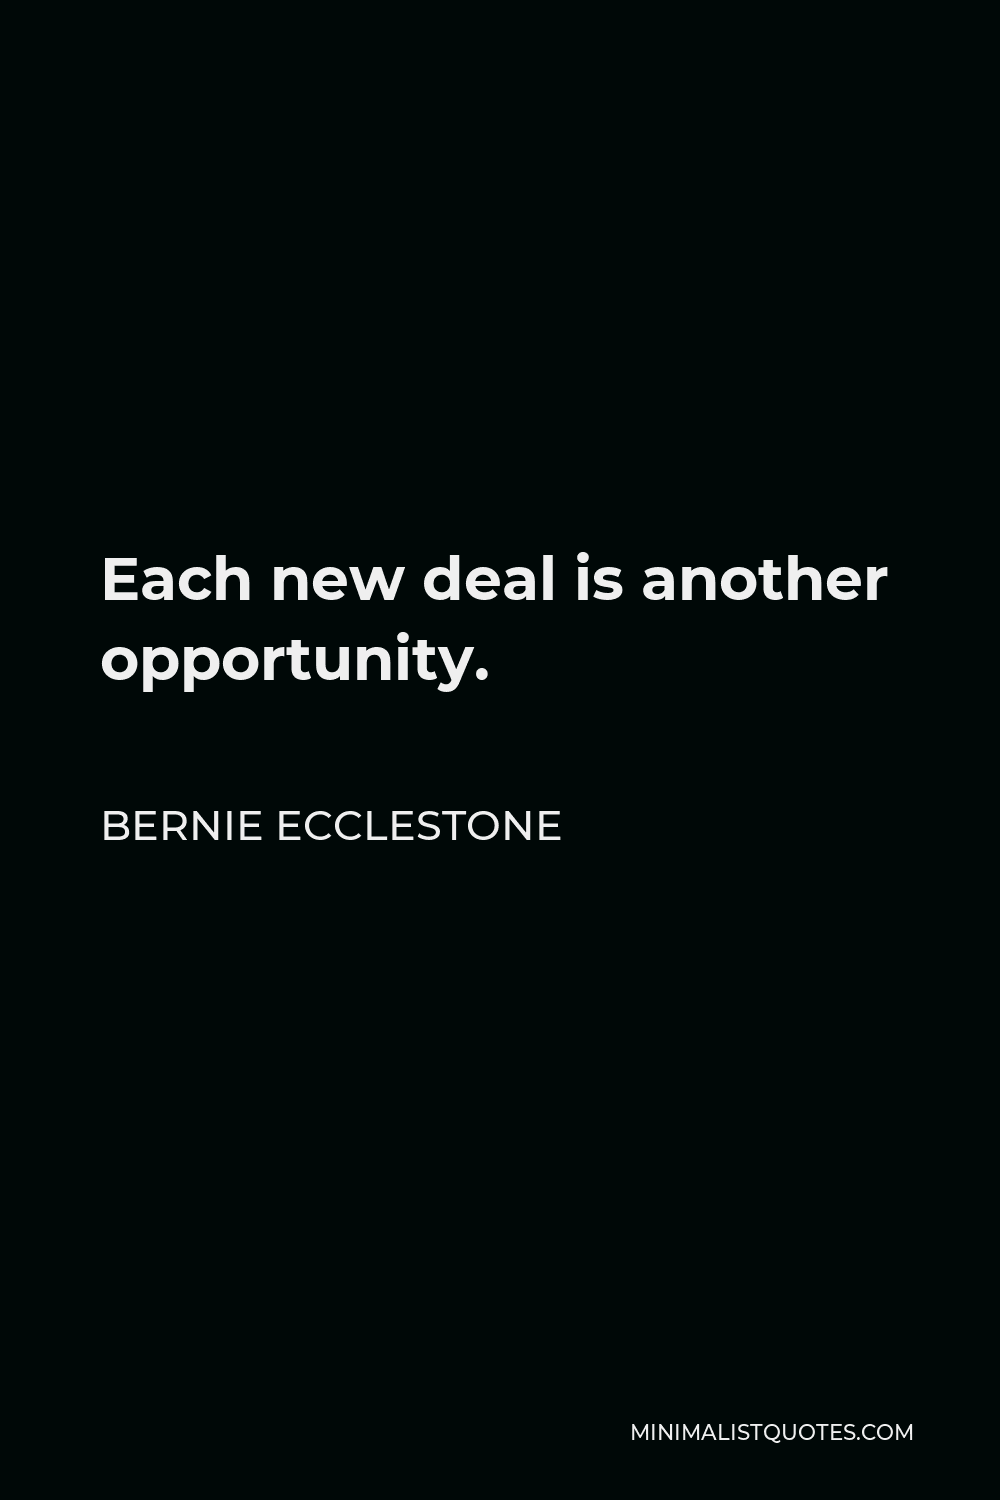 Bernie Ecclestone Quote - Each new deal is another opportunity.